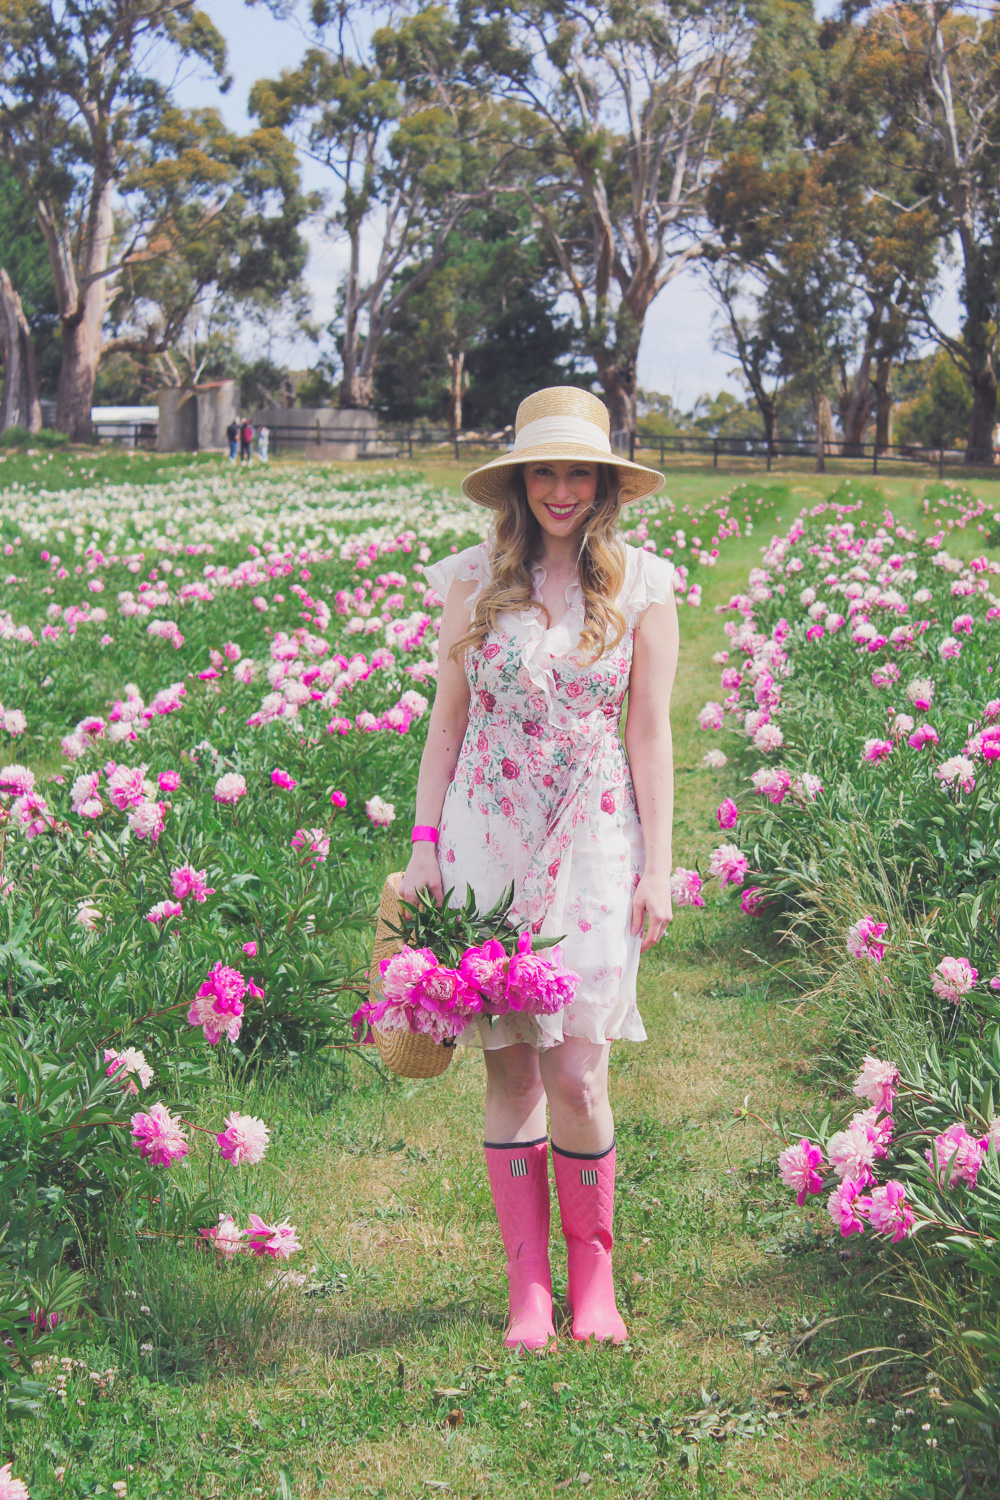 Goldfields Girl standing in the Peony Paddock at Spring Hill Peony Farm wearing an Alannah Hill dress and straw hat